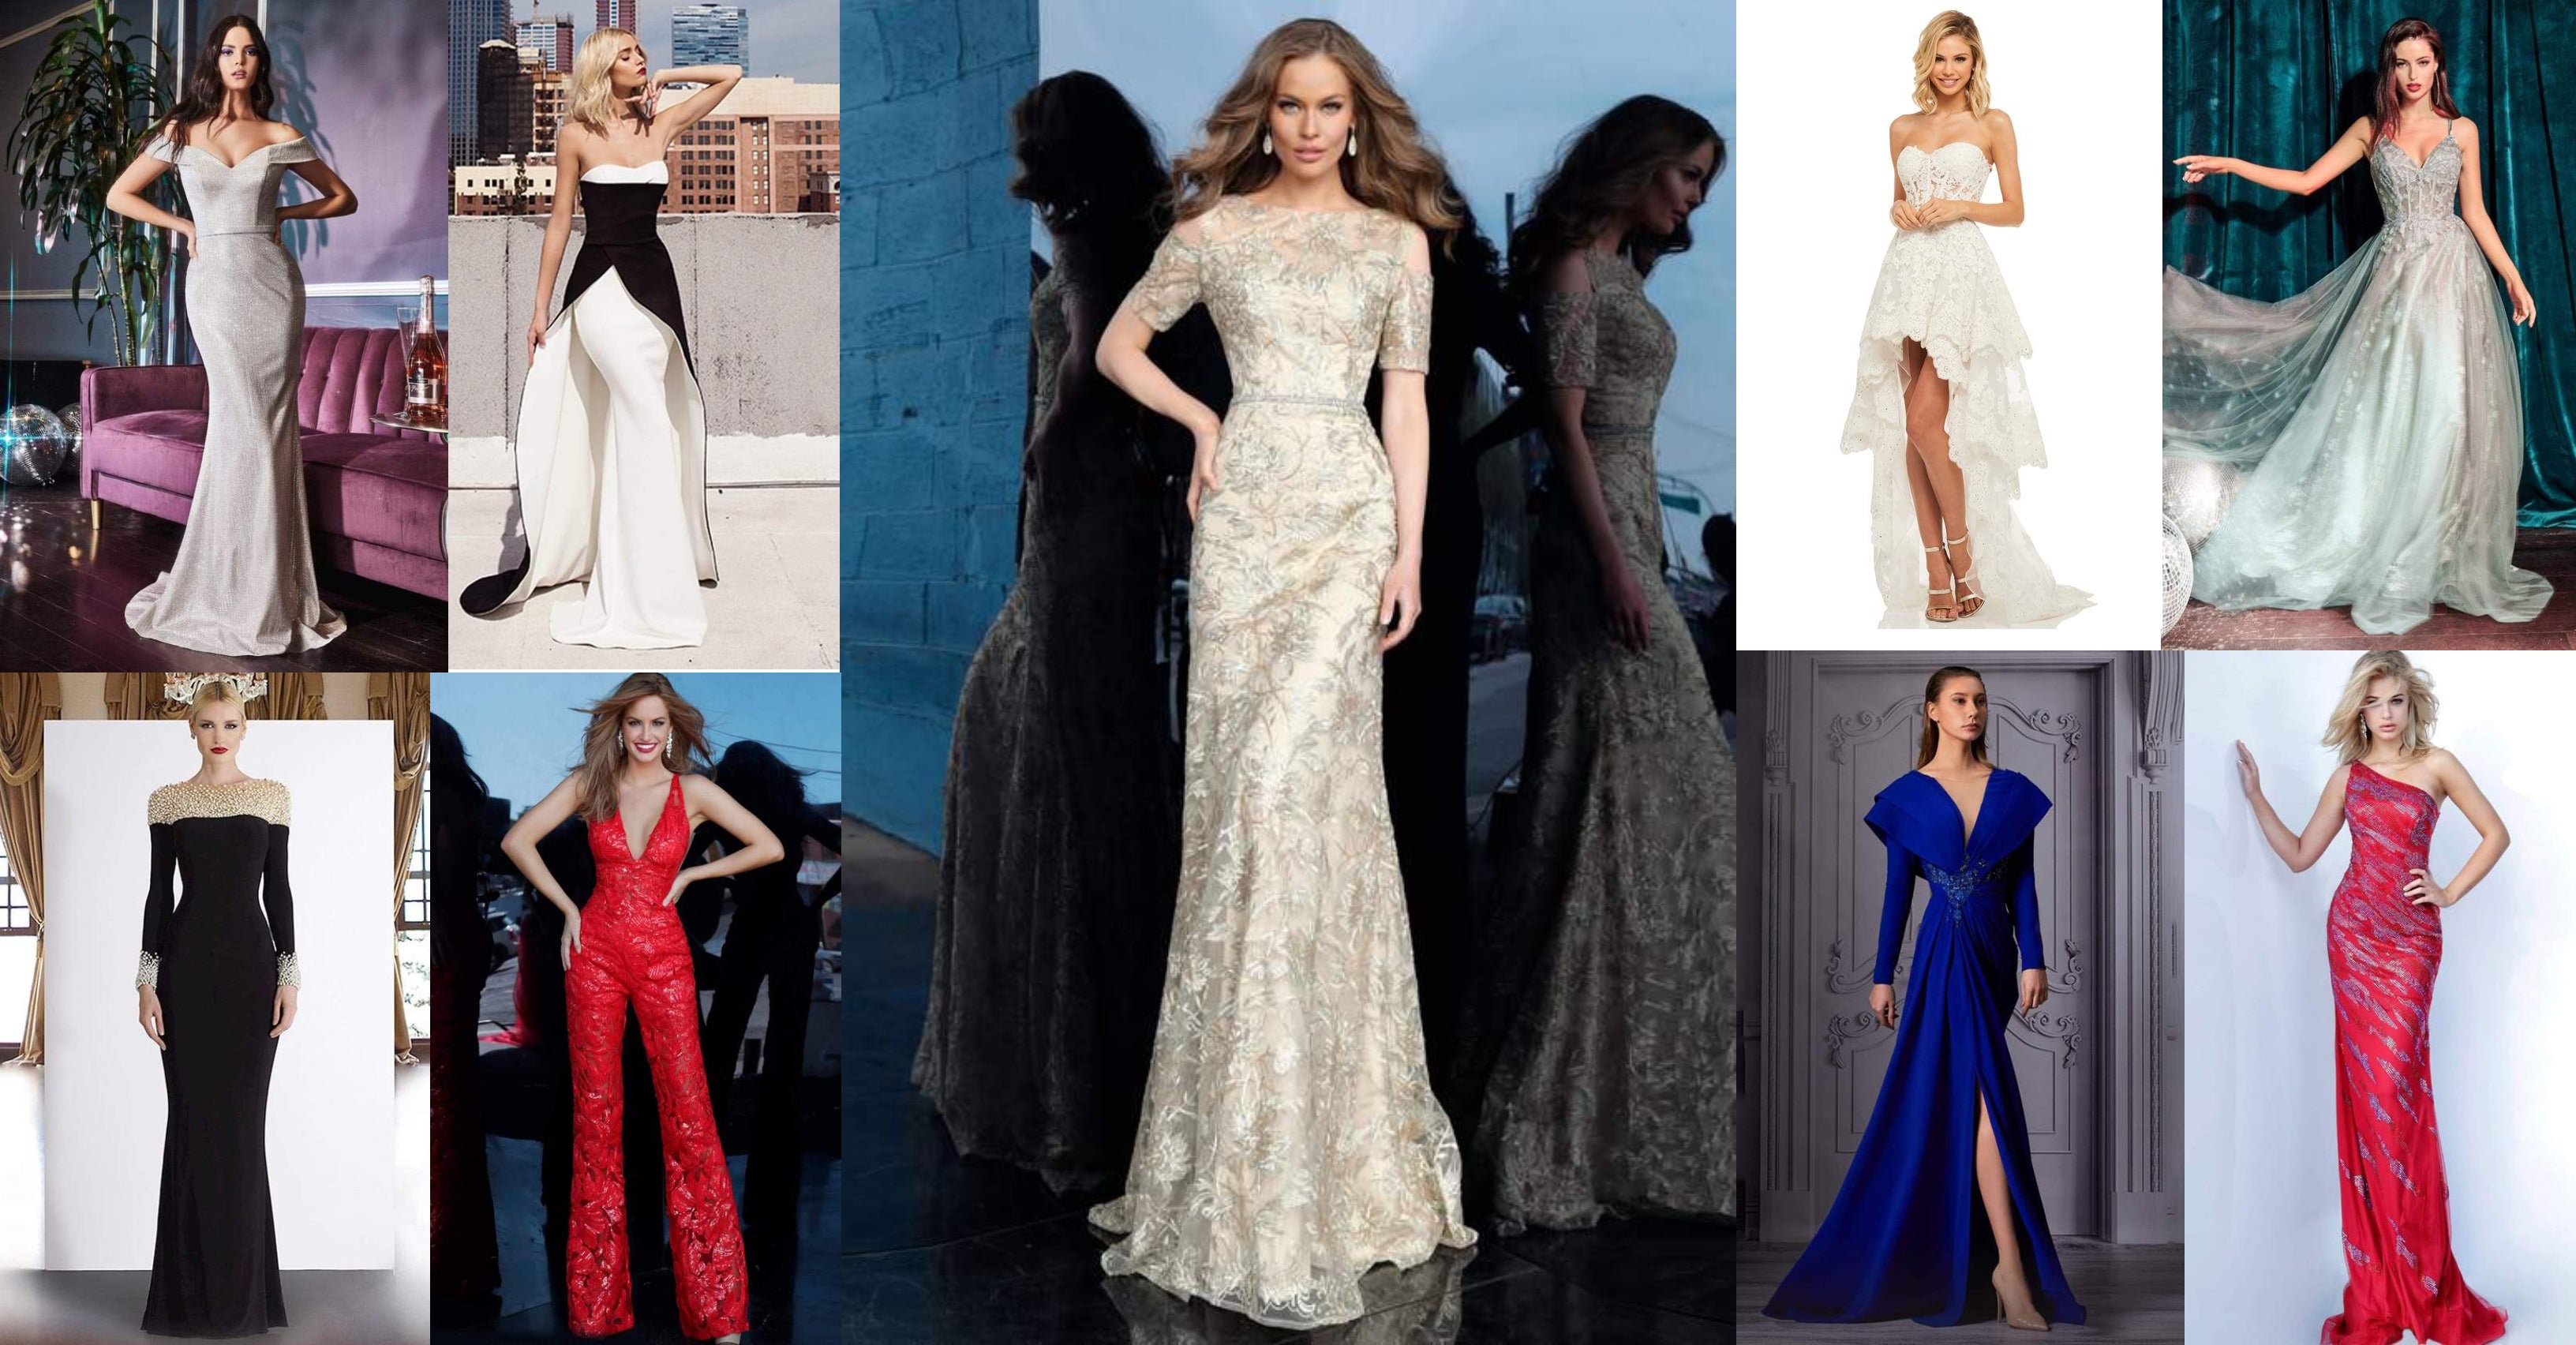 Doting On Designer Dresses? Top 5 Styles of Your Dreams | CoutureCandy ...